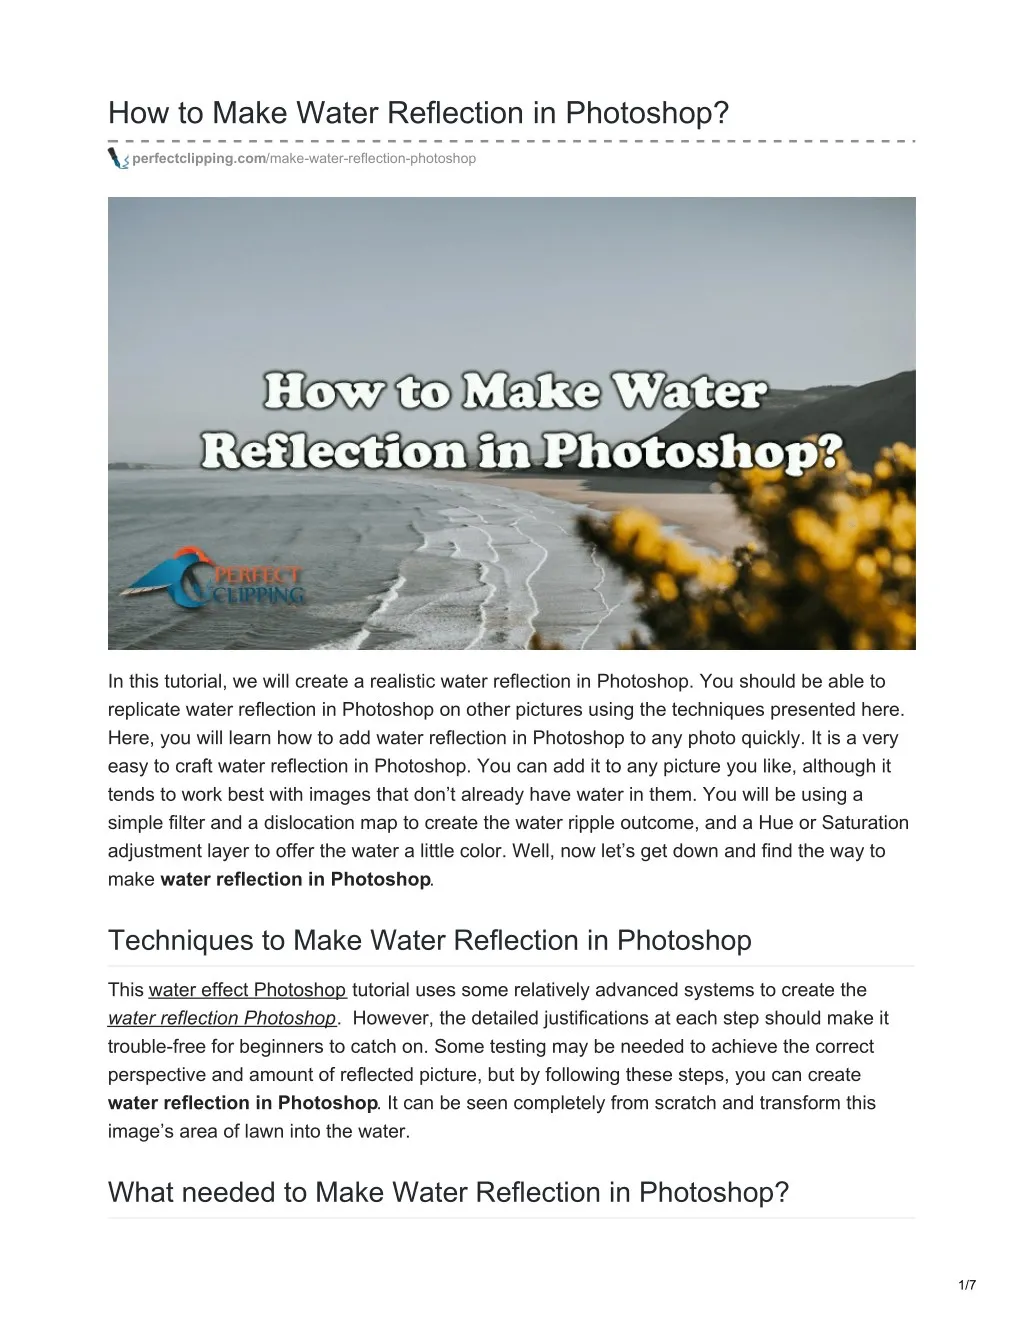 how to make water reflection in photoshop